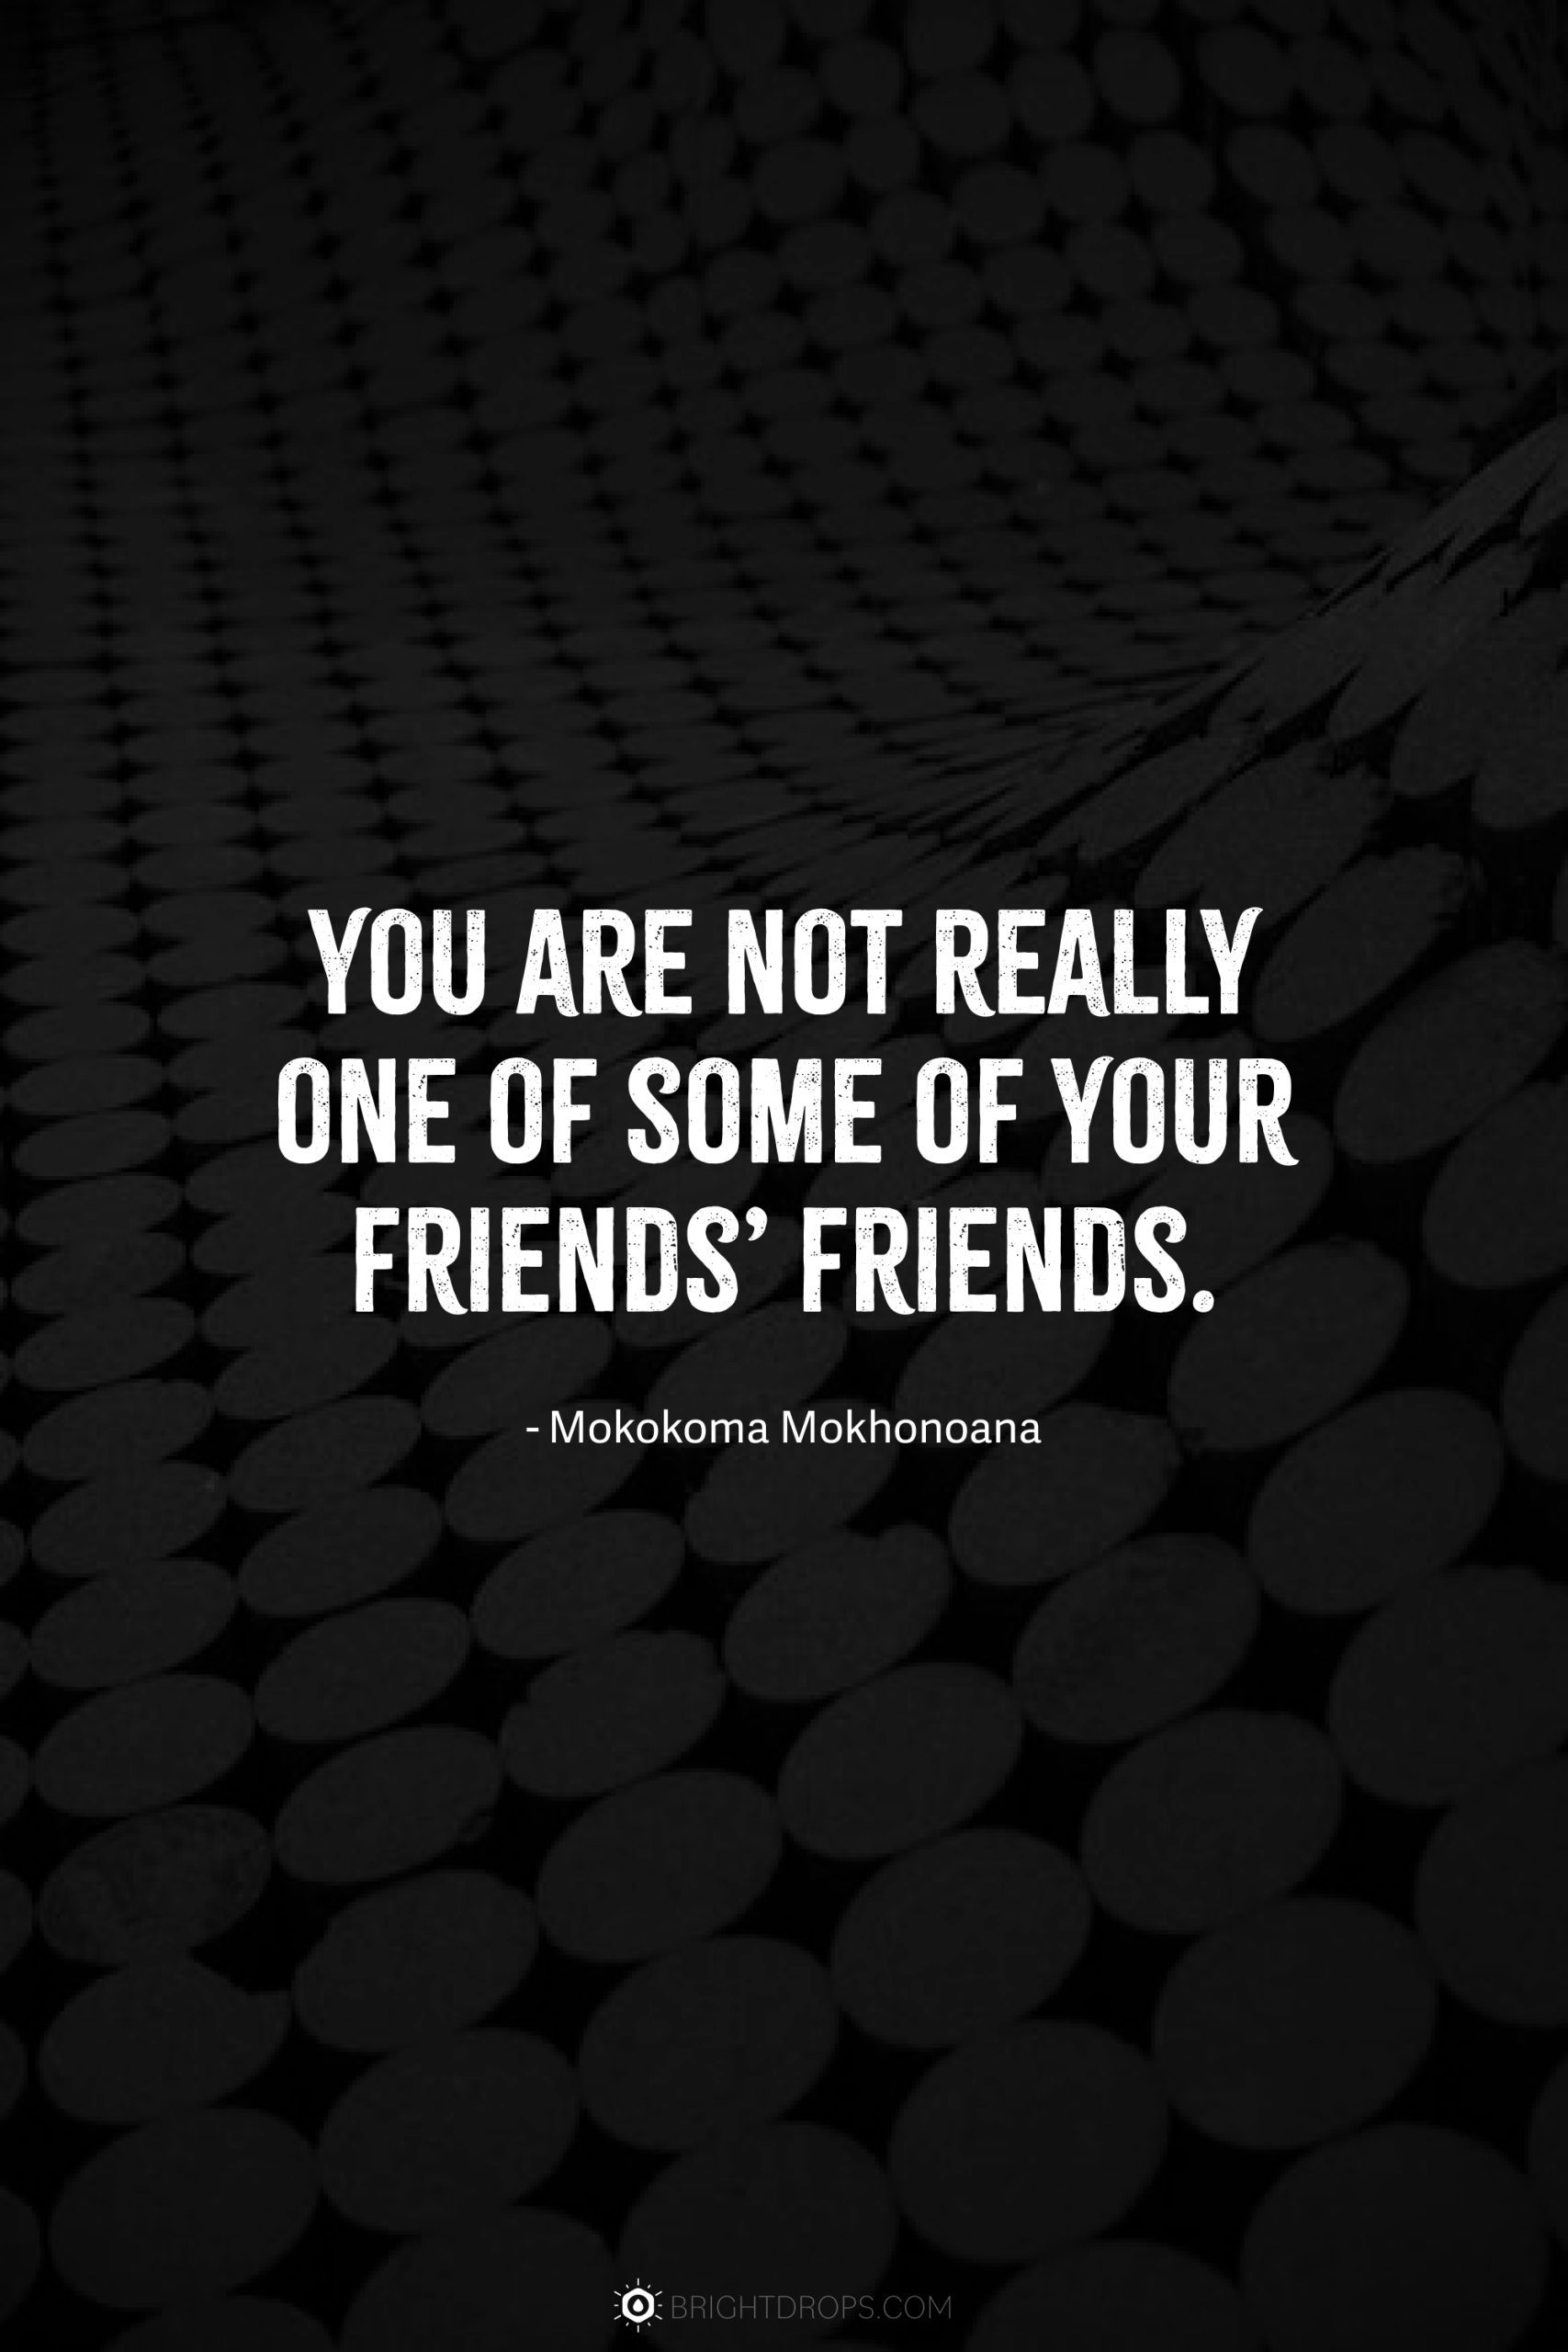 You are not really one of some of your friends’ friends.